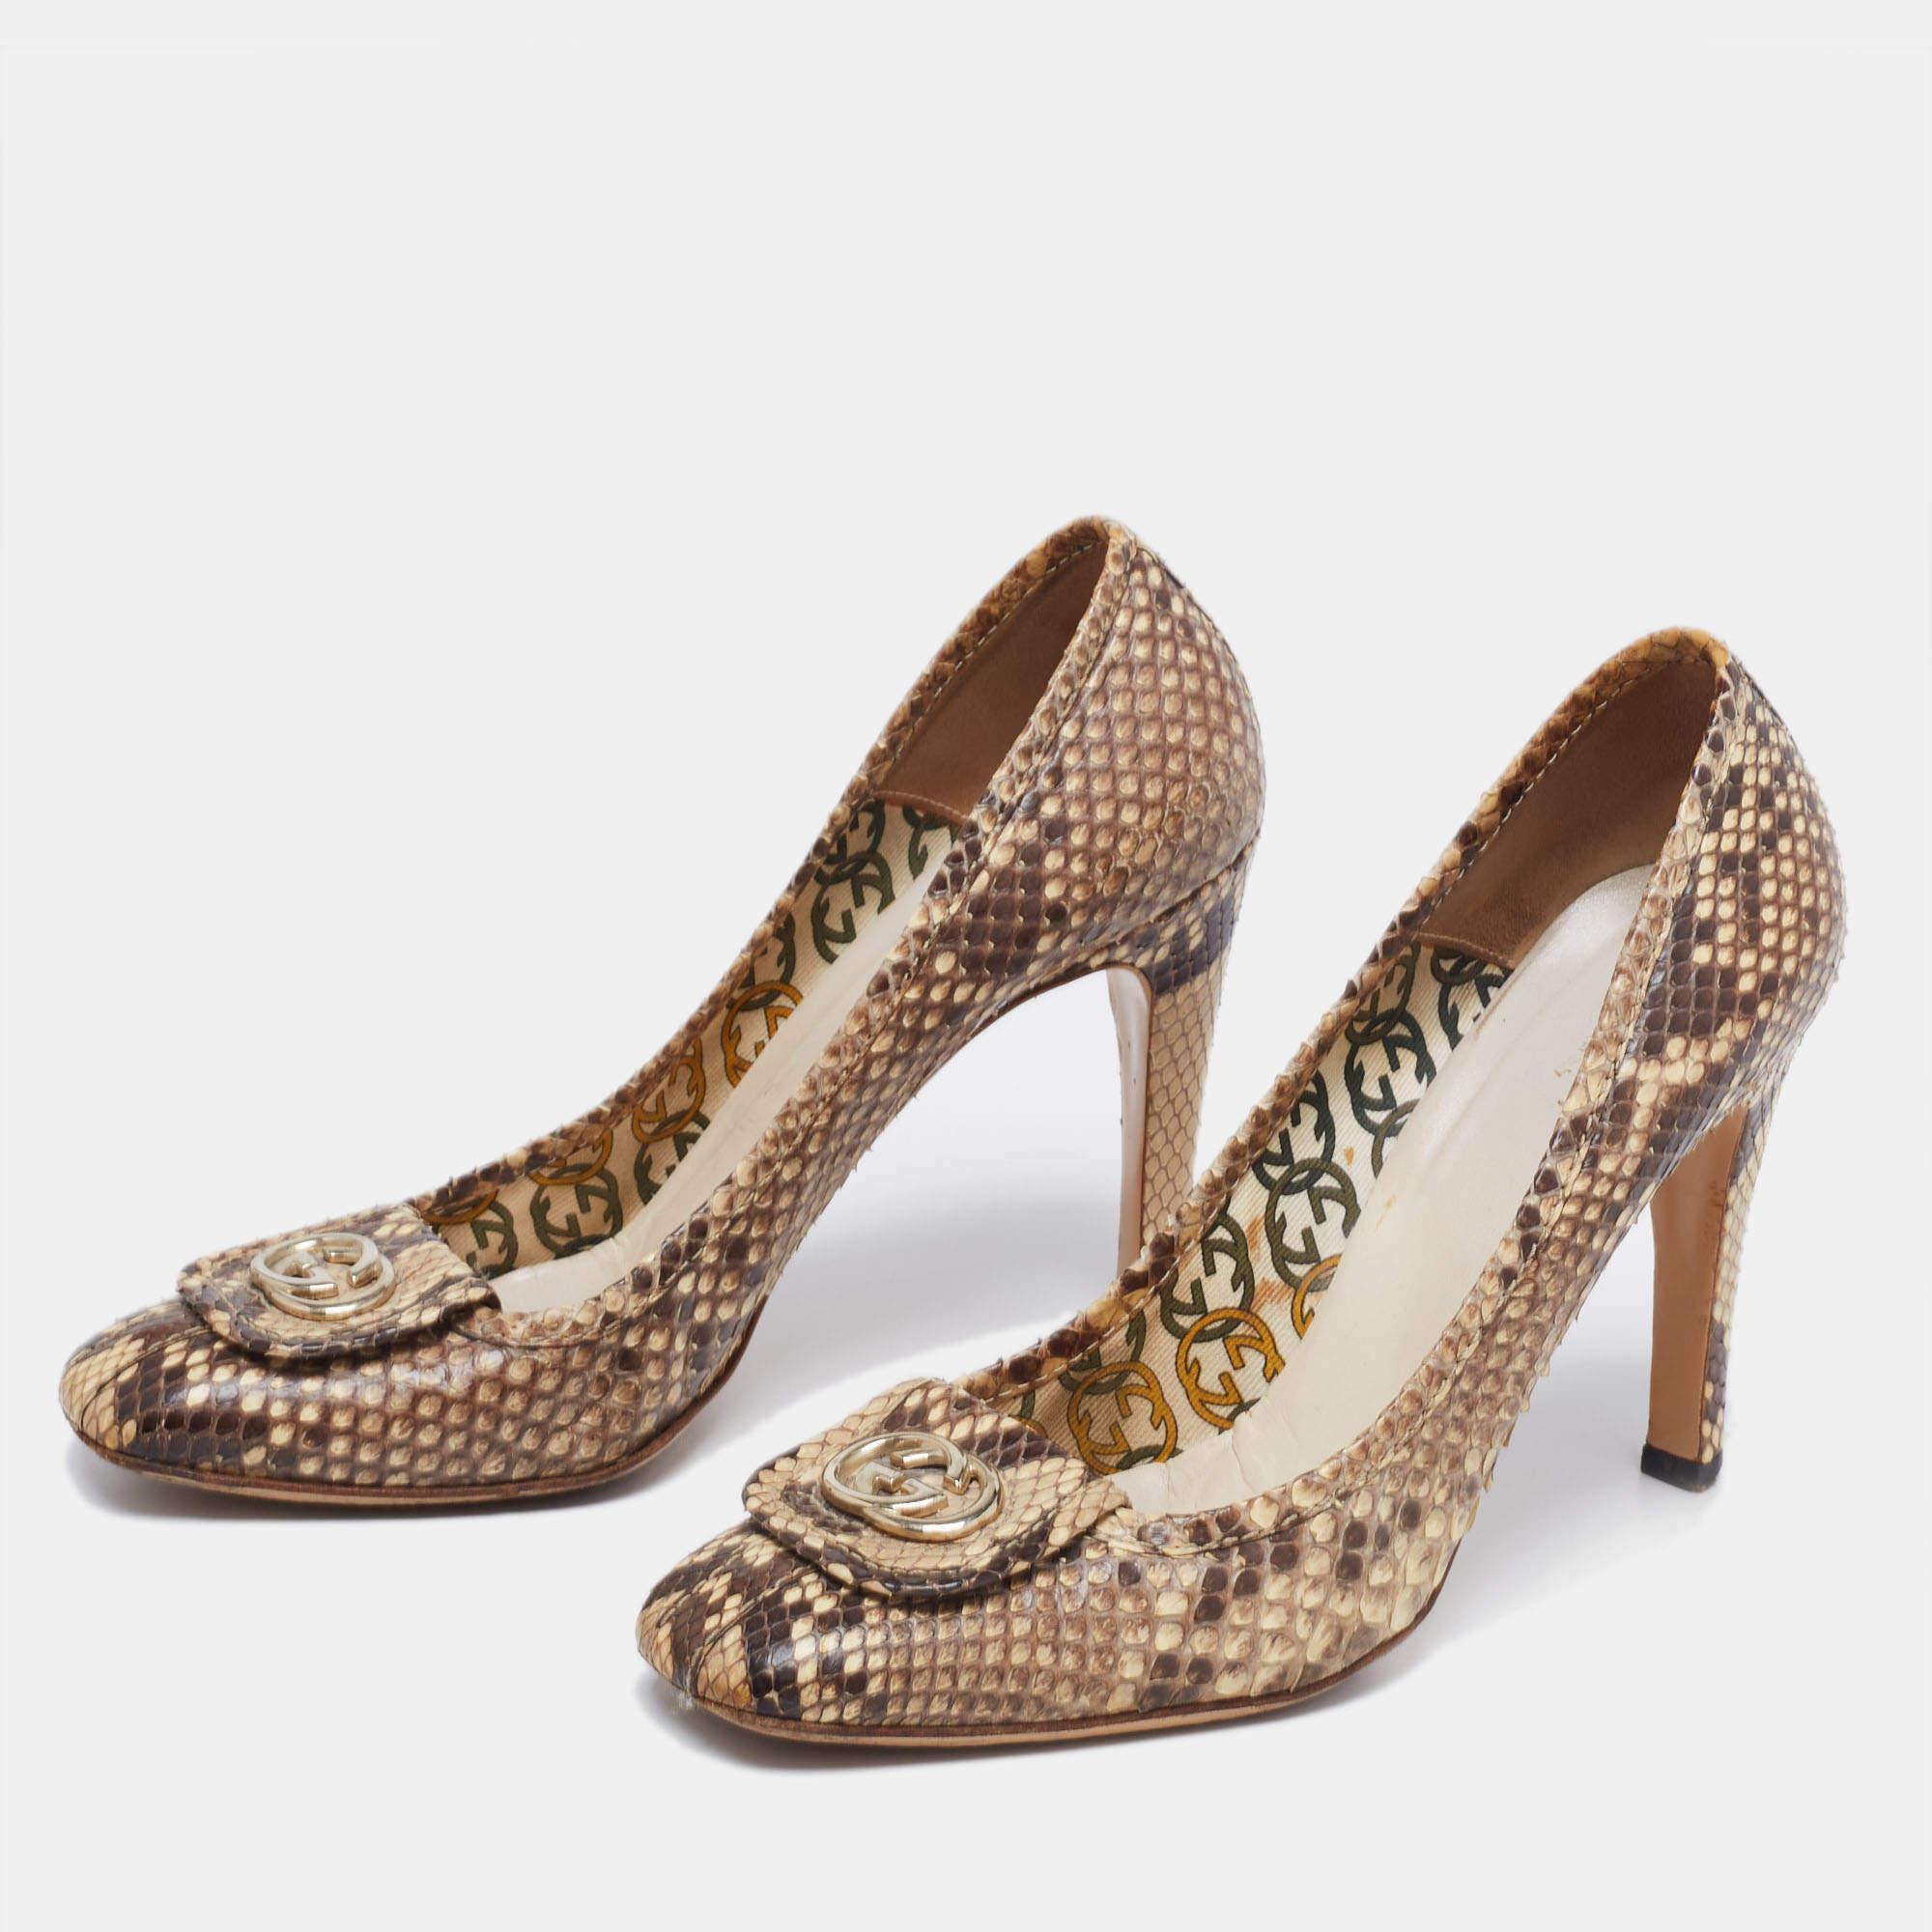 The alluring design and grand hue of these Gucci pumps make the pair a must-have. Crafted skilfully, these pumps are set on a durable base and comfortable heel. Choose this finely-designed pair of pumps to make a luxe fashion statement.

